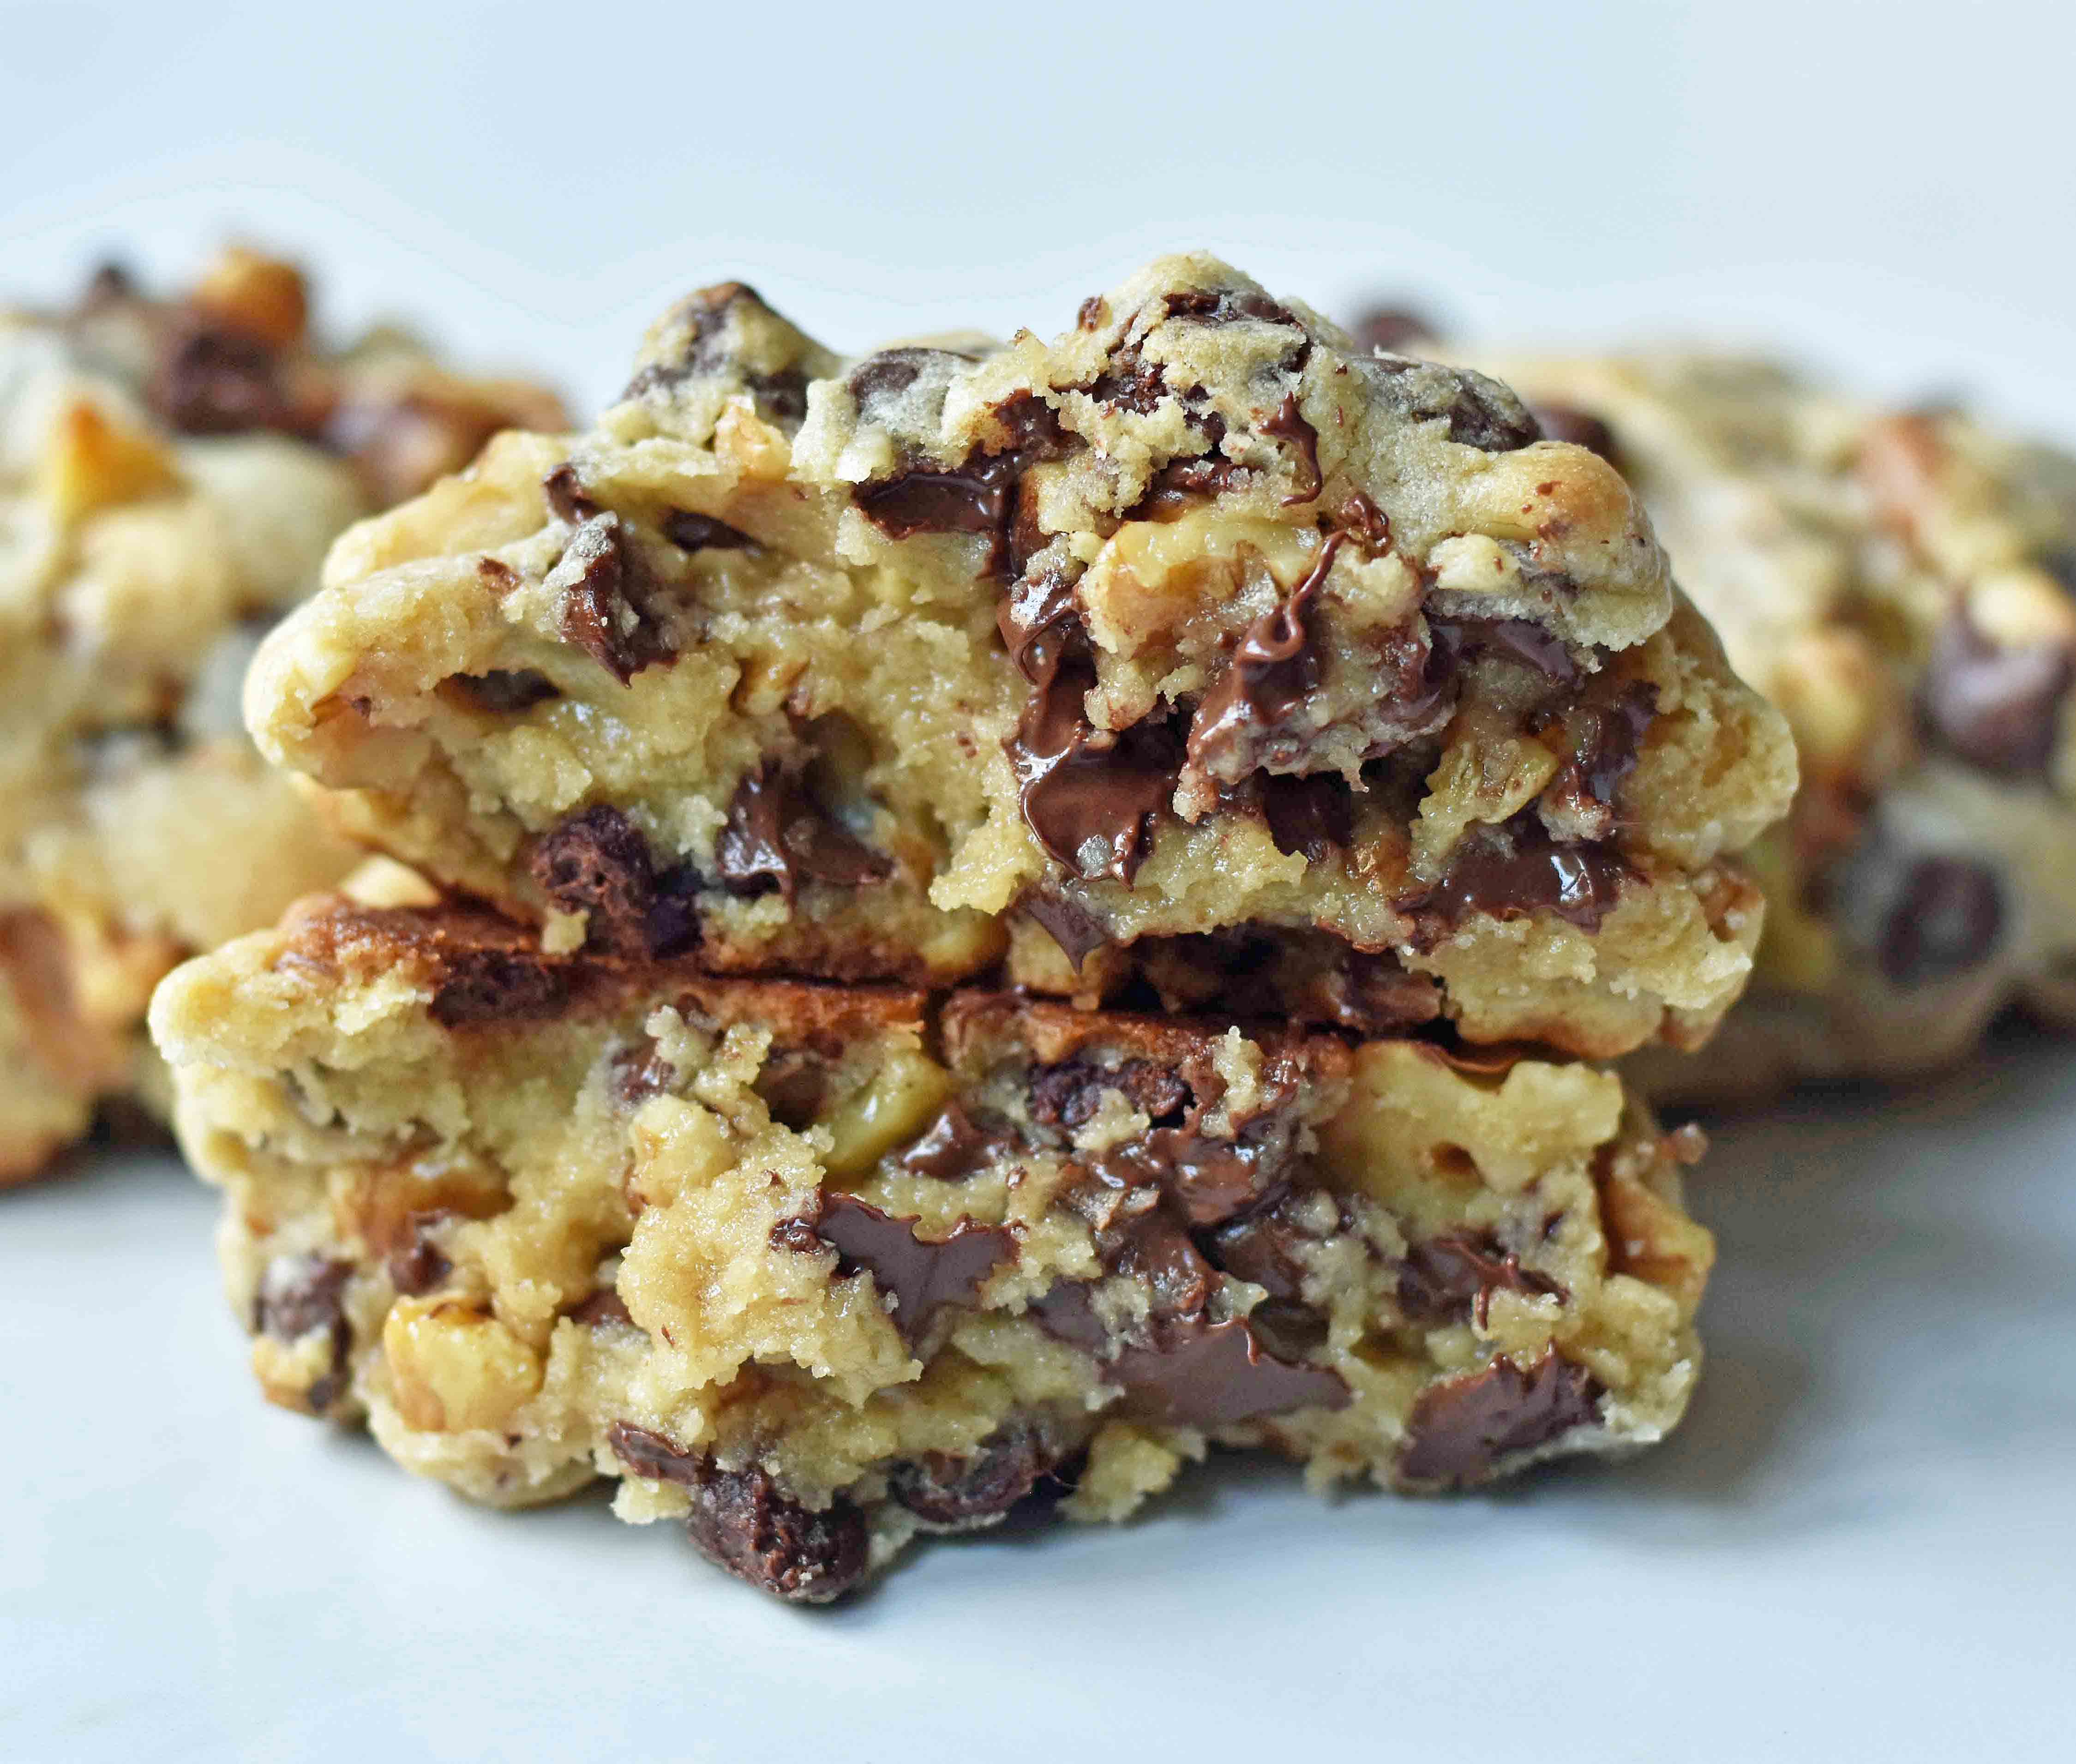 The BEST Walnut Chocolate Chip Cookies